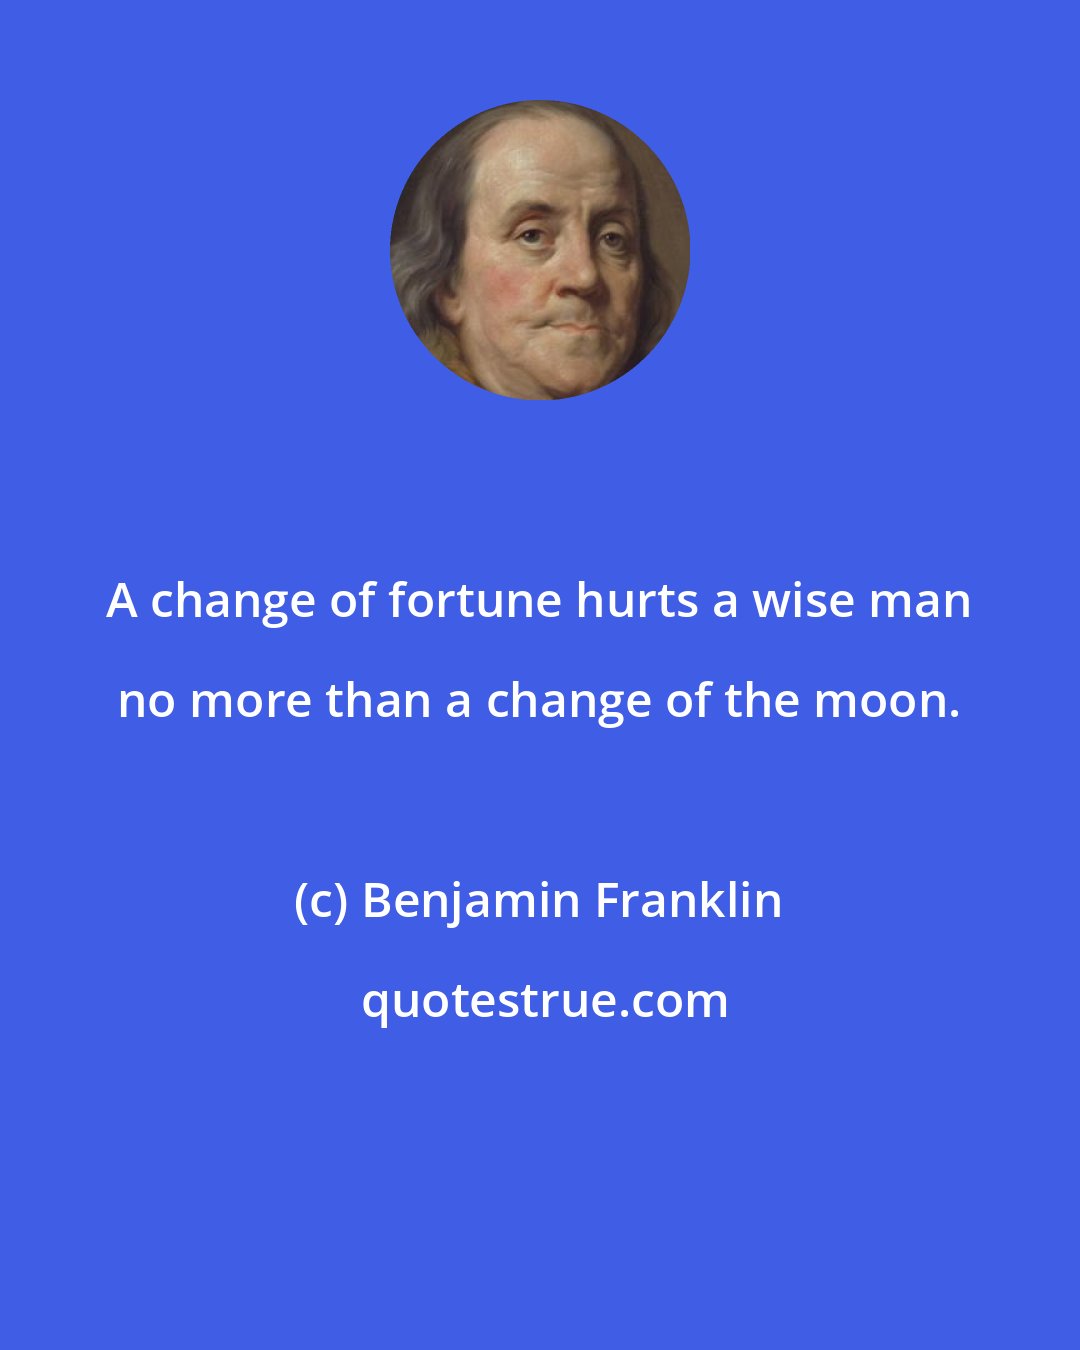 Benjamin Franklin: A change of fortune hurts a wise man no more than a change of the moon.